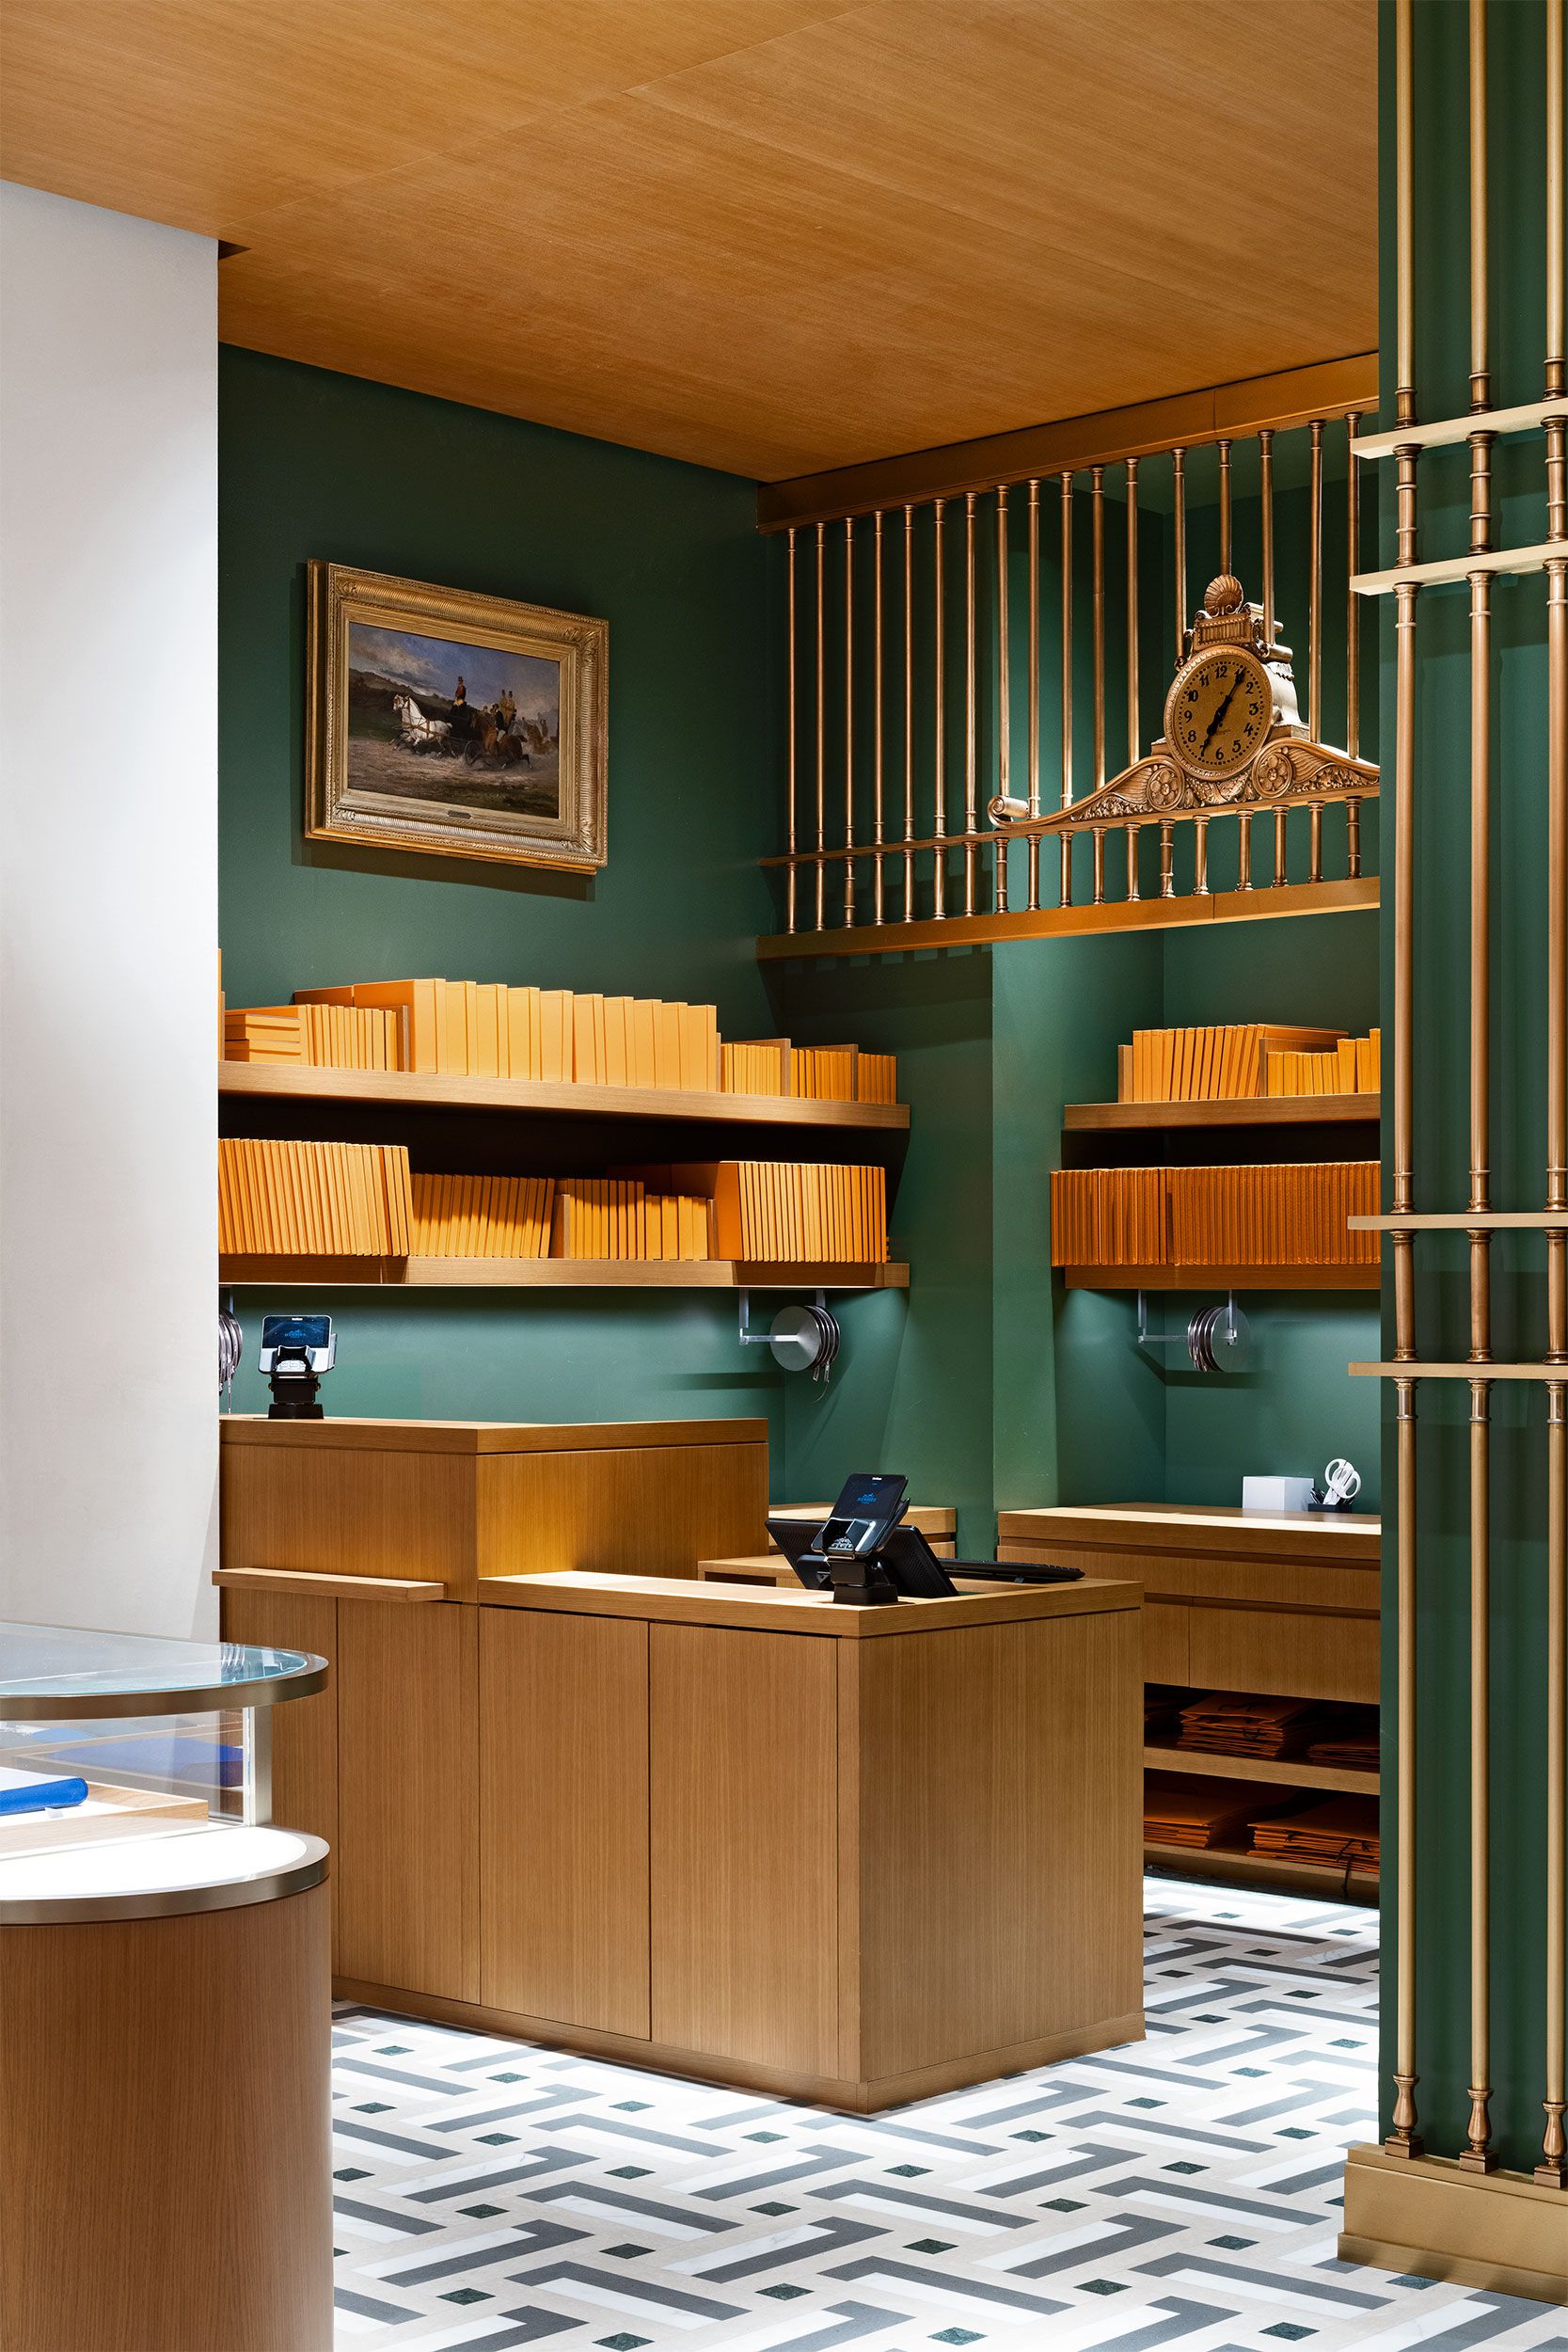 See the New Hermès Madison Avenue Maison by Denis Motel